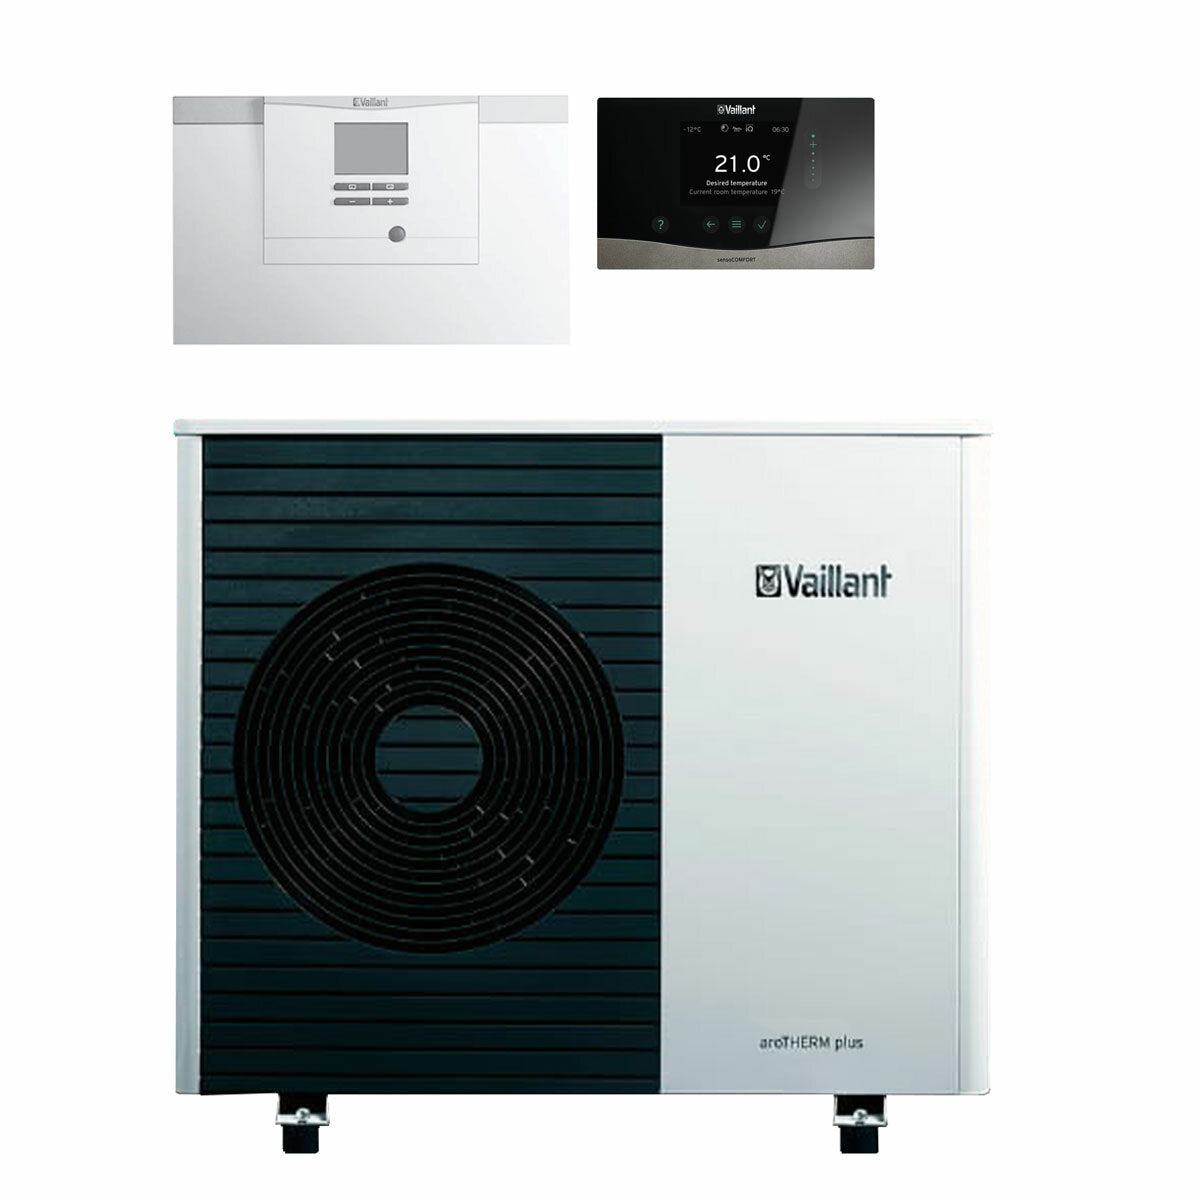 Vaillant aroTHERM plus VWL 85/6 air-to-water heat pump 8 kW 230 V single-phase monobloc R290 A++ high temperature